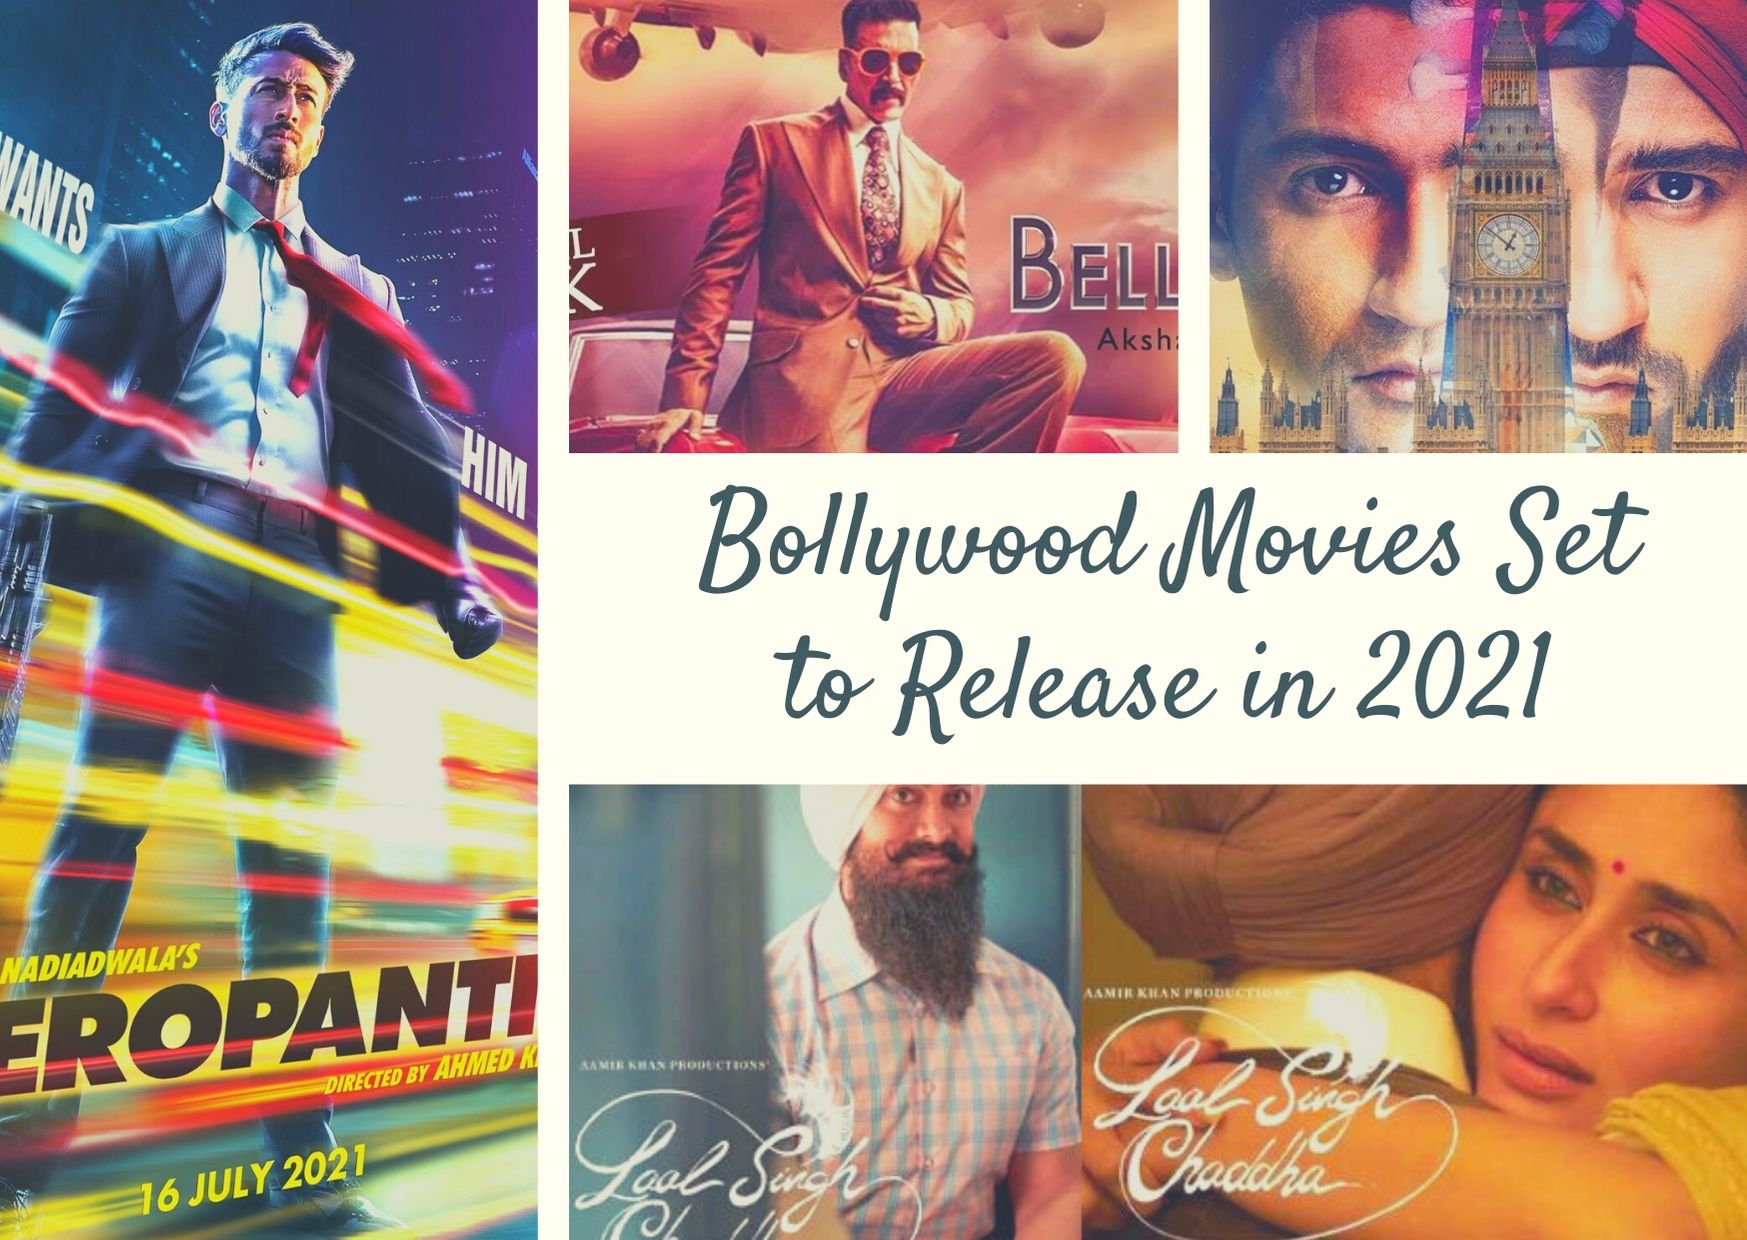 Bollywood Movies Set to Release in 2021